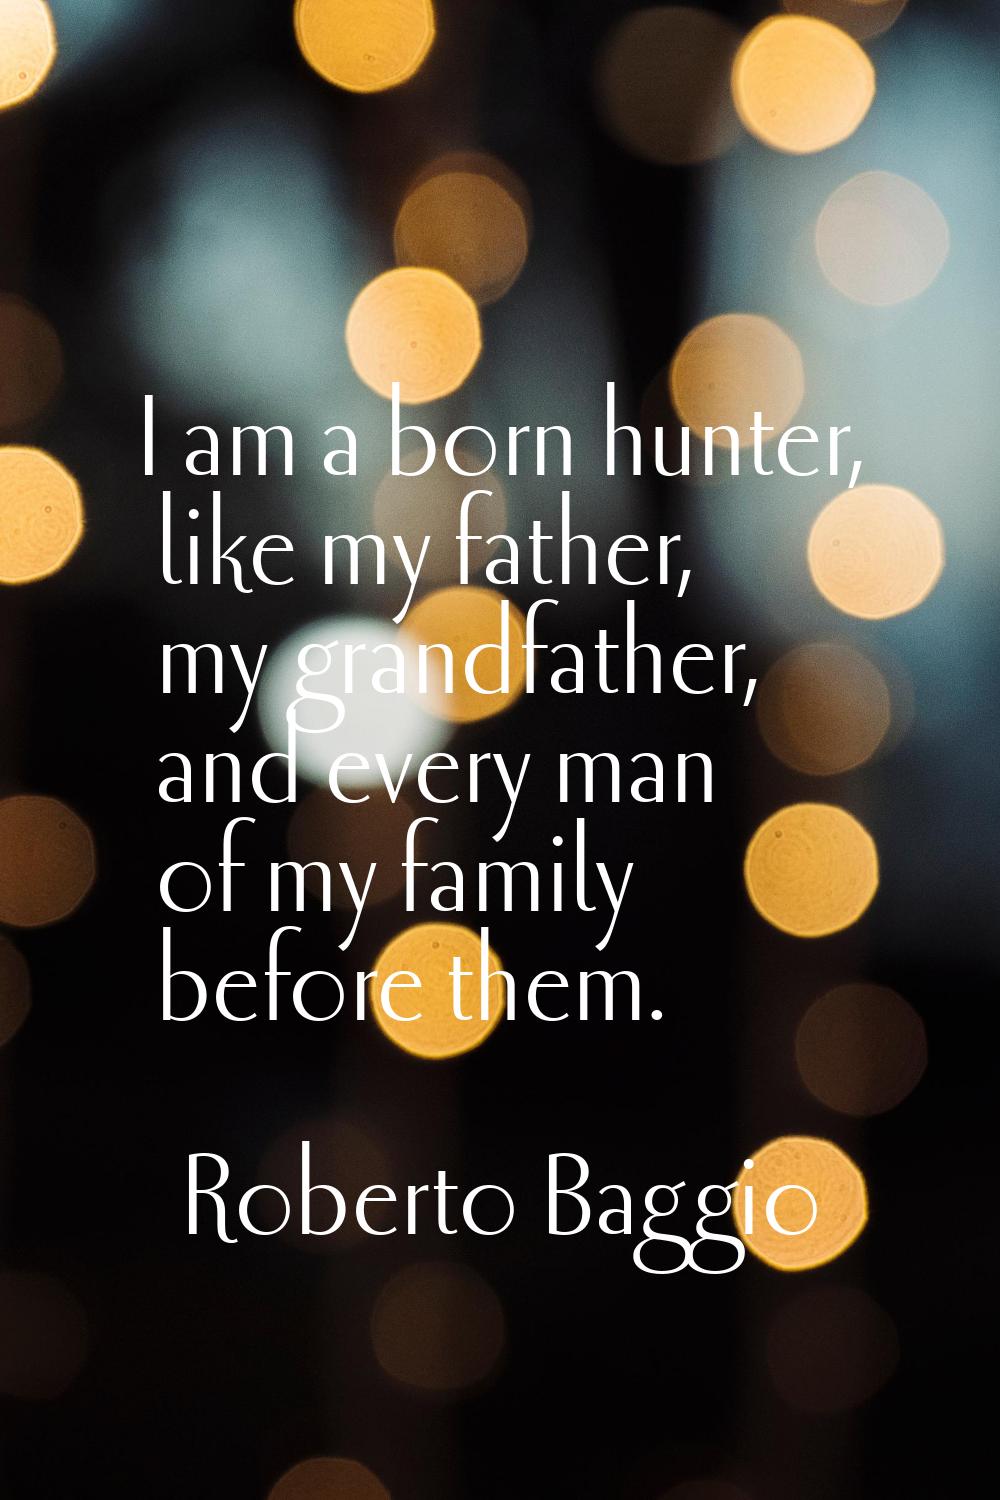 I am a born hunter, like my father, my grandfather, and every man of my family before them.